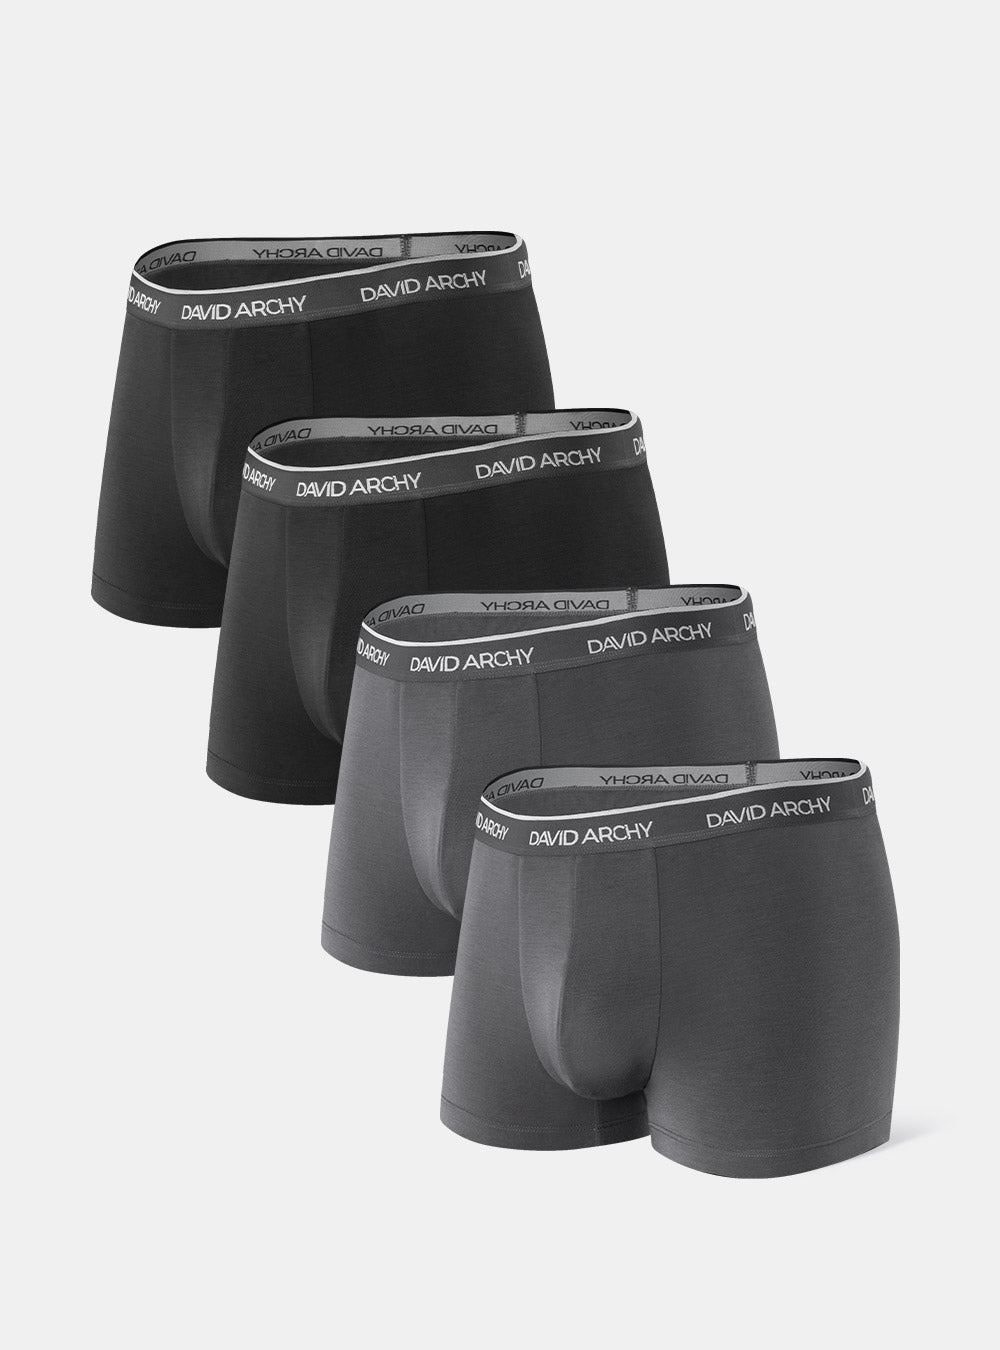 DAVID ARCHY Men's Underwear Micro Modal Dual Pouch Trunks Support Ball  Pouch Bulge Enhancing Boxer Briefs for Men 4 Pack (S, Black) at   Men's Clothing store: Boxer Briefs